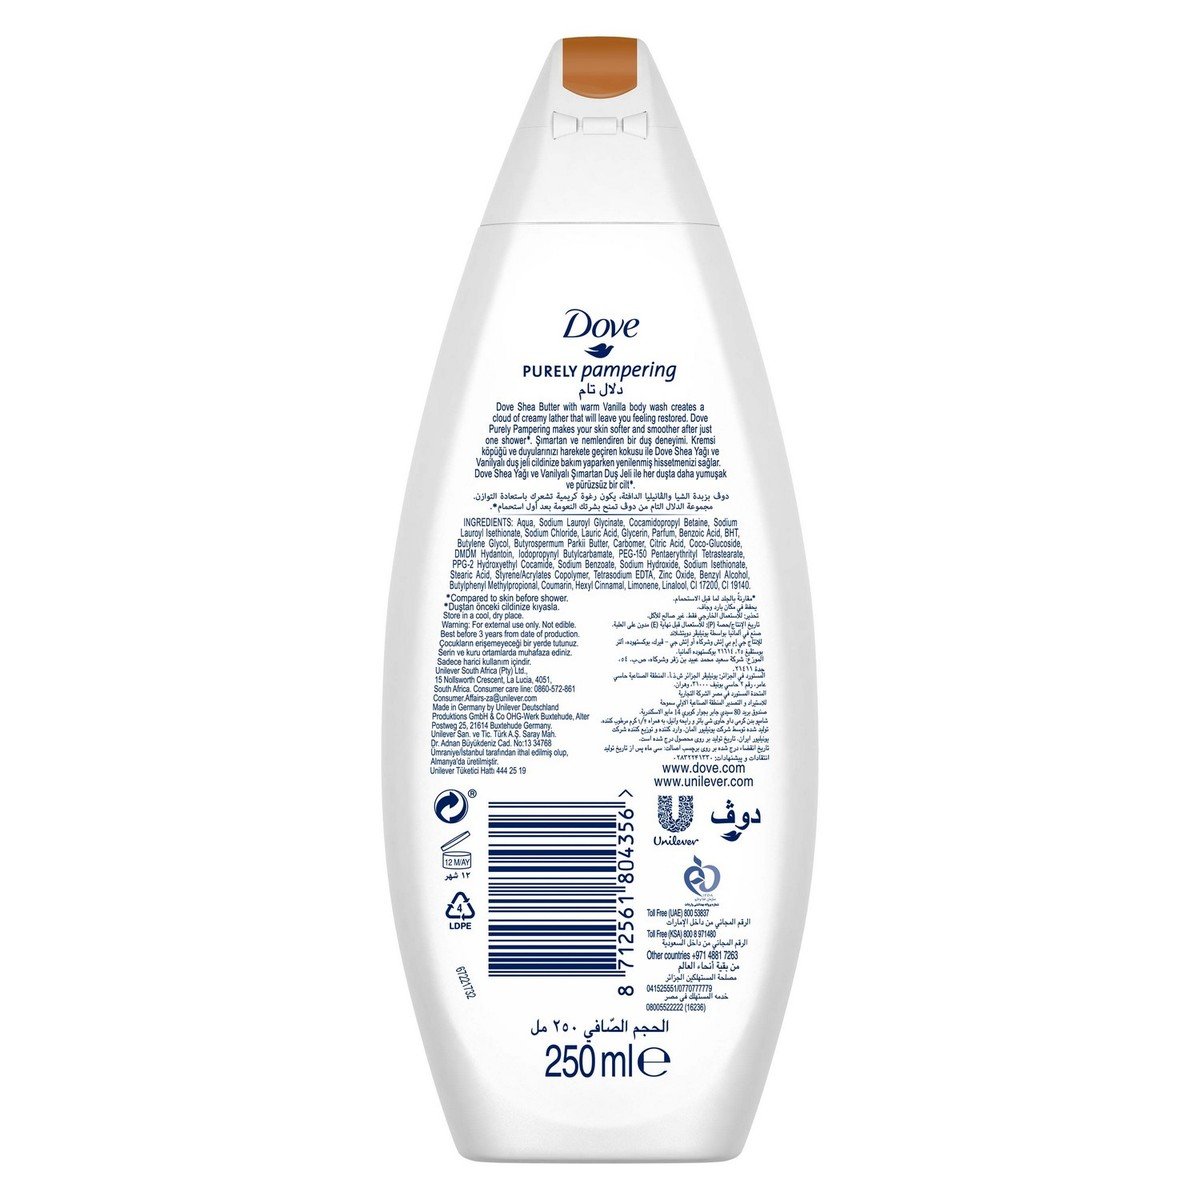 Dove Purely Pampering Body Wash Shea Butter 250 ml